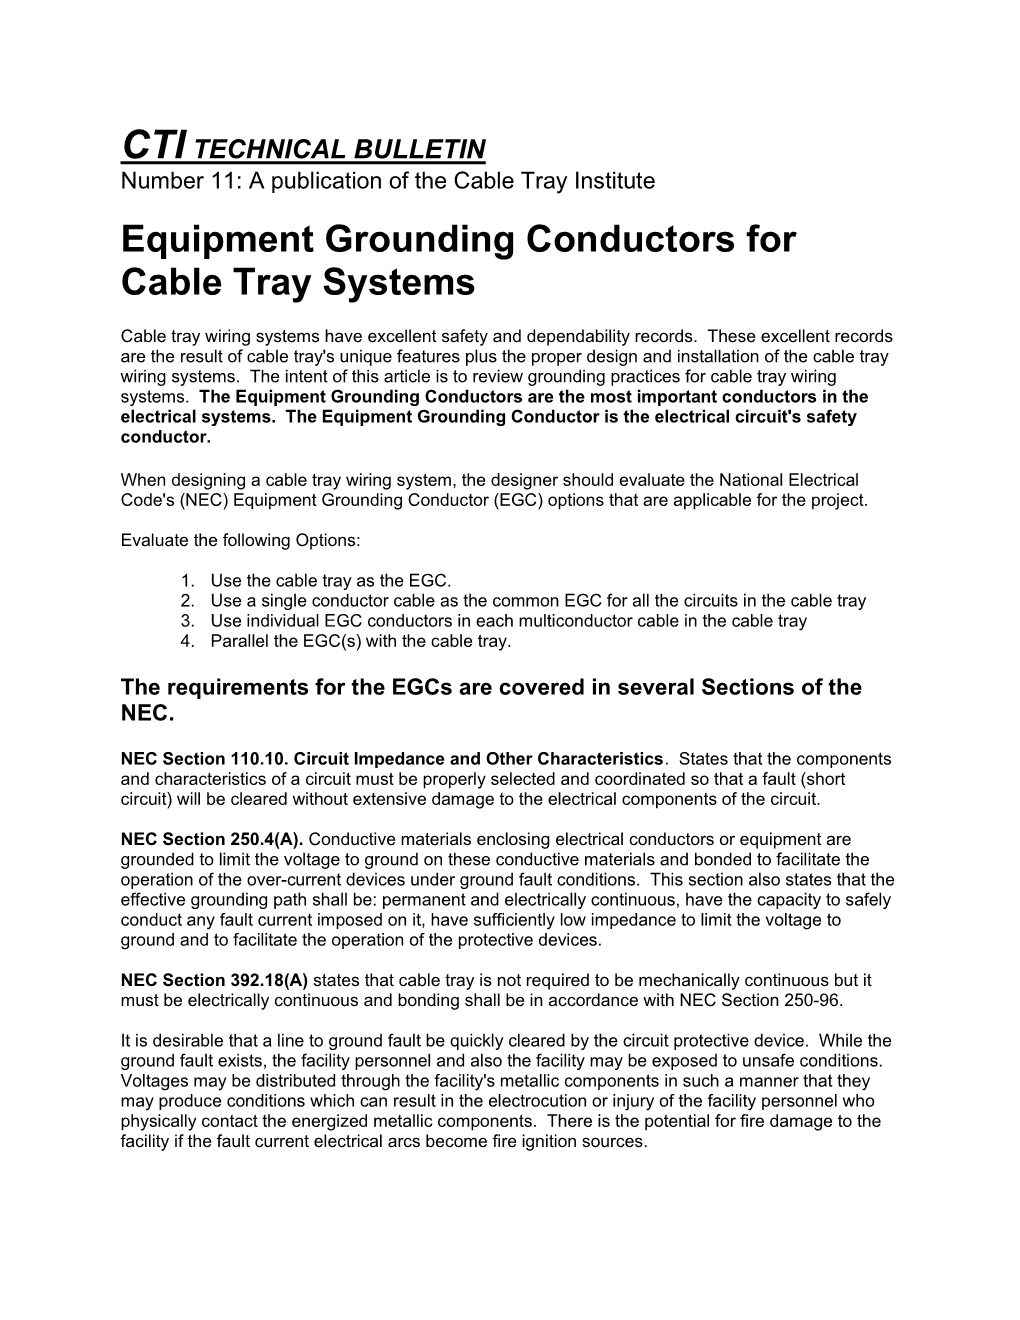 Equipment Grounding Conductors for Cable Tray Systems